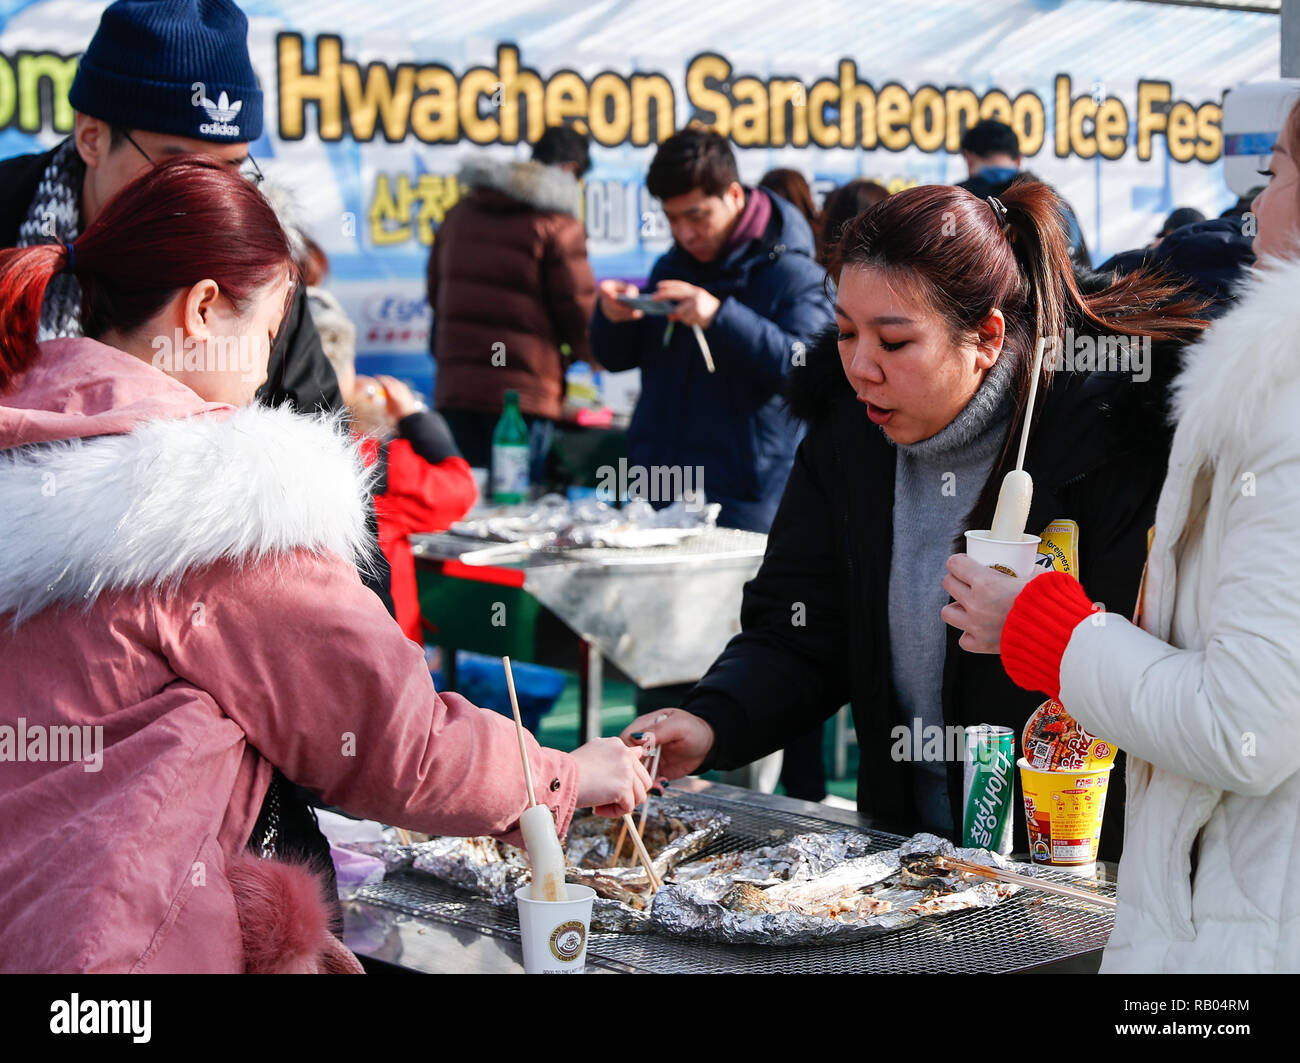 Hwacheon, South Korea. 5th Jan, 2019. People enjoy grilled trouts by the side of a frozen river during the Sancheoneo Ice Festival in Hwacheon, South Korea, Jan. 5, 2019. As one of the biggest winter events in South Korea, the annual three-week festival draws people to the frozen Hwacheon river, where organizers drill fishing holes in the ice and release trouts into the river during the festival period. This year the festival lasts from Jan. 5 to Jan. 27. Credit: Wang Jingqiang/Xinhua/Alamy Live News Stock Photo